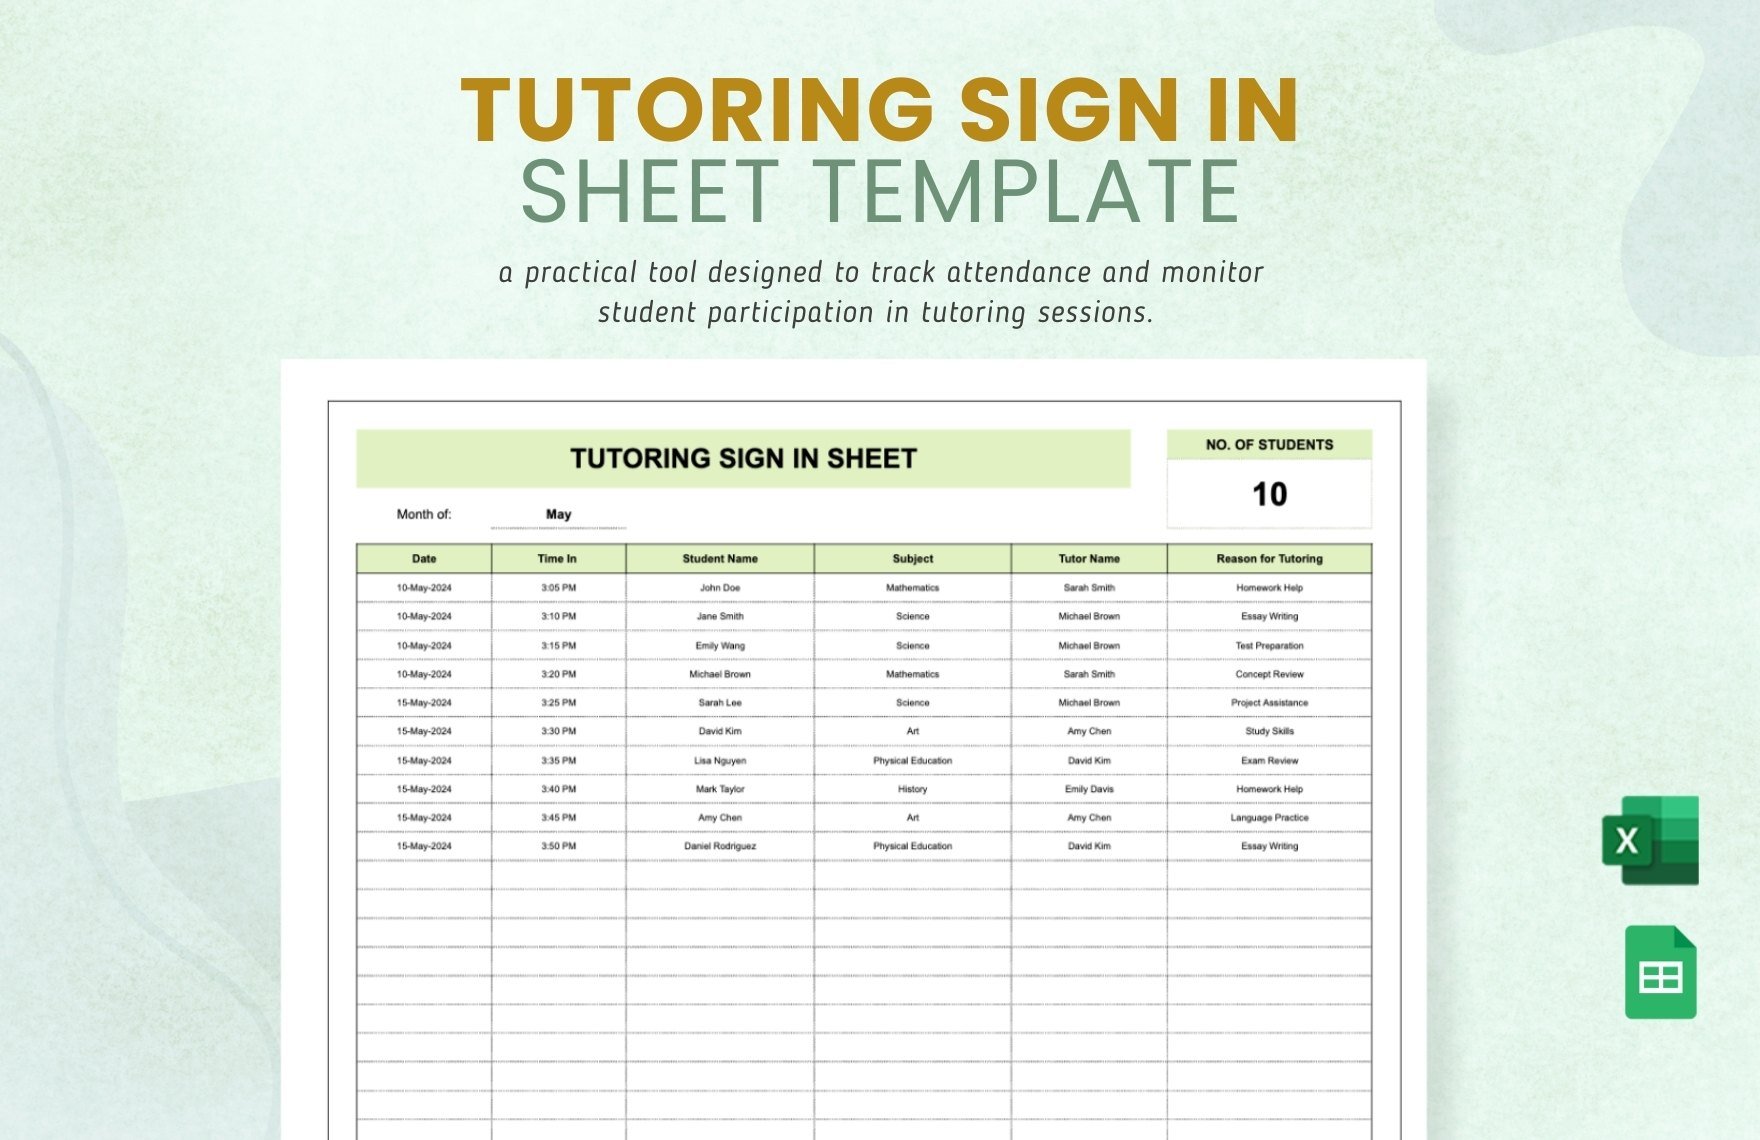 Tutoring Sign in Sheet Template in Excel, Google Sheets